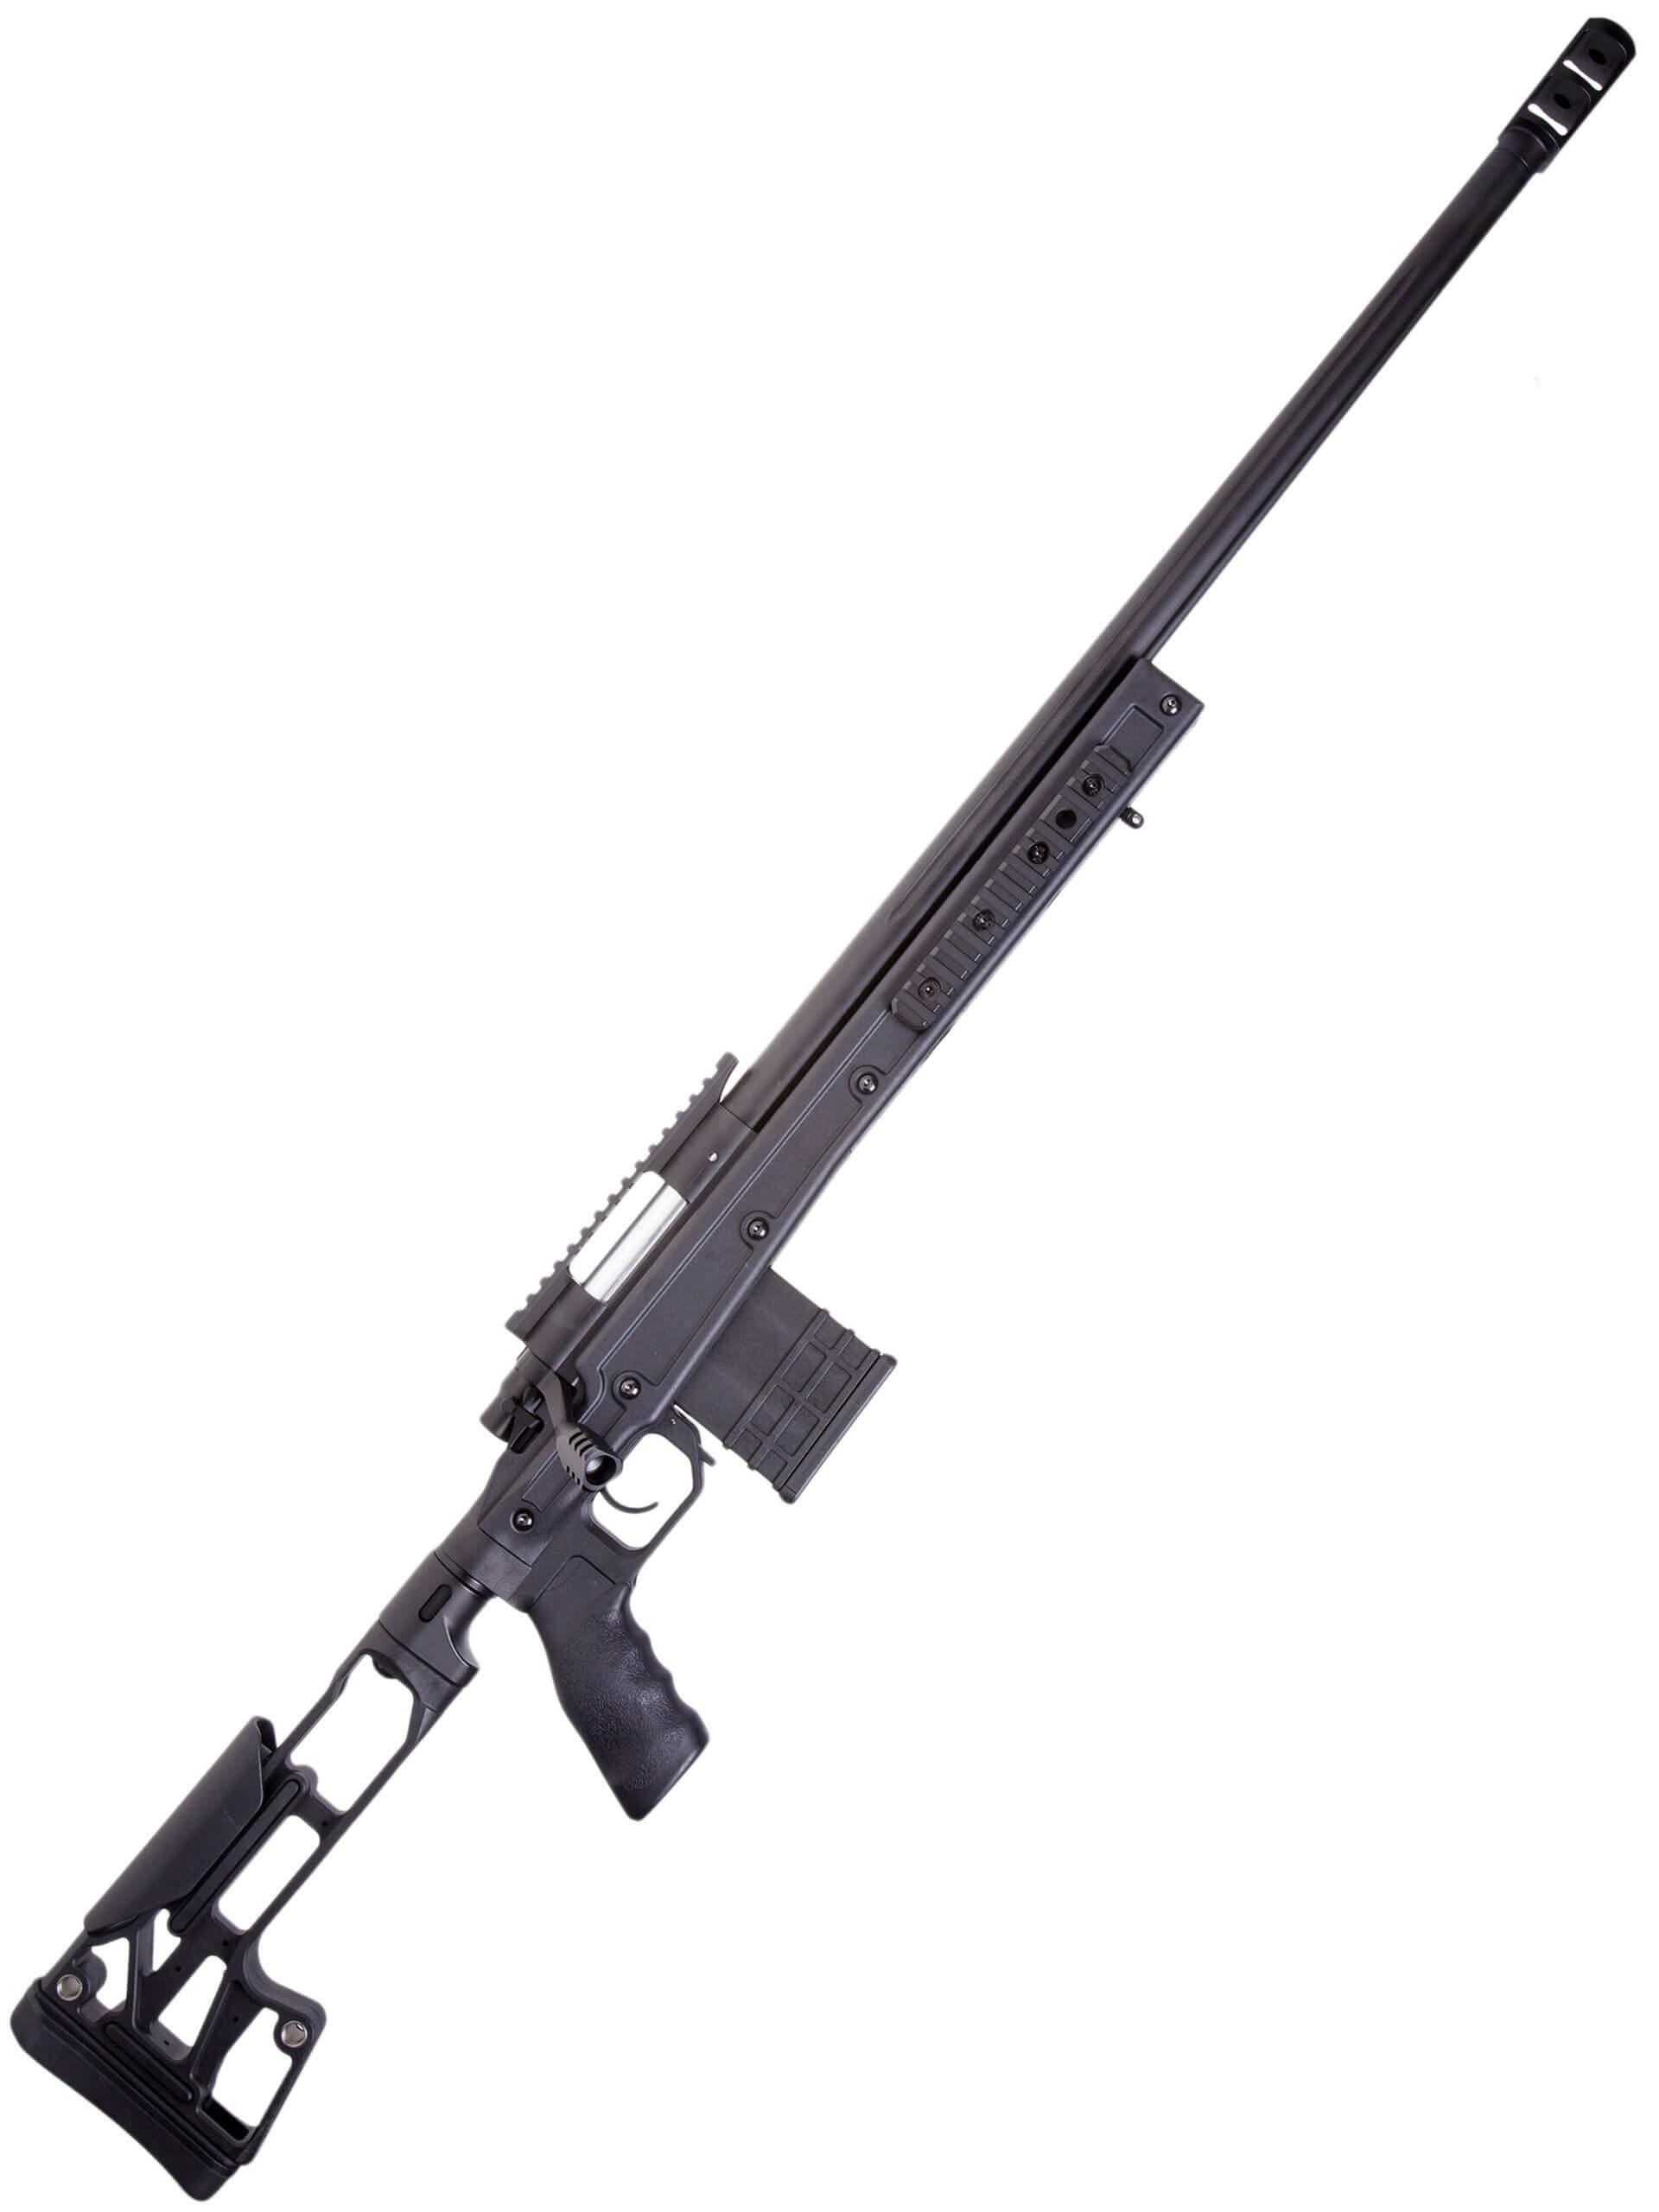 CYMA - CM.707 Sniper Rifle With Skeletal Stock